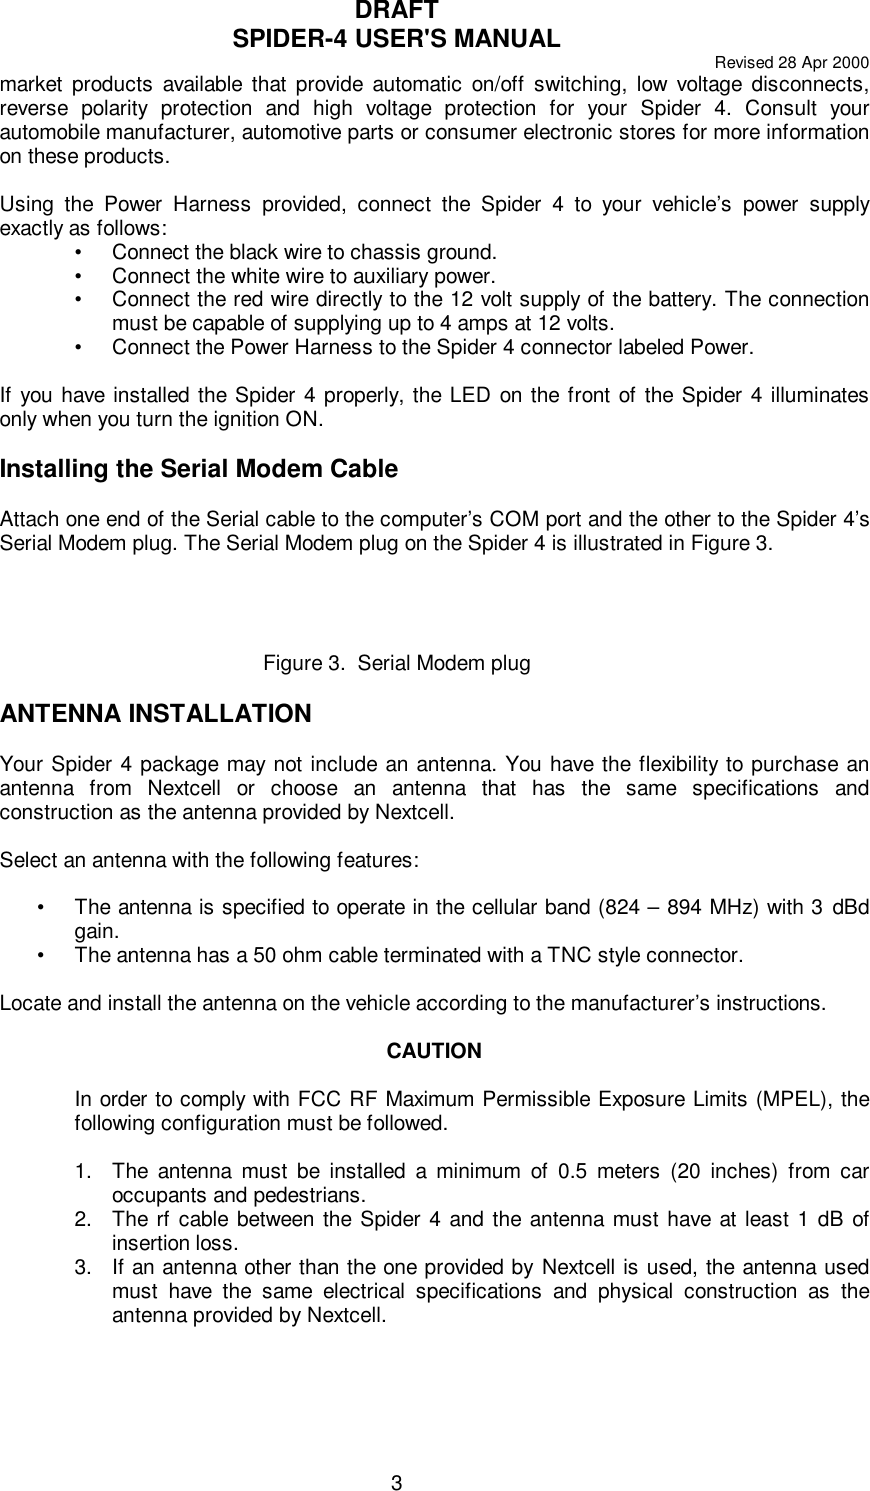 DRAFTSPIDER-4 USER&apos;S MANUAL Revised 28 Apr 20003market products available that provide automatic on/off switching, low voltage disconnects,reverse polarity protection and high voltage protection for your Spider 4. Consult yourautomobile manufacturer, automotive parts or consumer electronic stores for more informationon these products.Using the Power Harness provided, connect the Spider 4 to your vehicle’s power supplyexactly as follows:•Connect the black wire to chassis ground.•Connect the white wire to auxiliary power.•Connect the red wire directly to the 12 volt supply of the battery. The connectionmust be capable of supplying up to 4 amps at 12 volts.•Connect the Power Harness to the Spider 4 connector labeled Power.If you have installed the Spider 4 properly, the LED on the front of the Spider 4 illuminatesonly when you turn the ignition ON.Installing the Serial Modem CableAttach one end of the Serial cable to the computer’s COM port and the other to the Spider 4’sSerial Modem plug. The Serial Modem plug on the Spider 4 is illustrated in Figure 3.Figure 3.  Serial Modem plugANTENNA INSTALLATIONYour Spider 4 package may not include an antenna. You have the flexibility to purchase anantenna from Nextcell or choose an antenna that has the same specifications andconstruction as the antenna provided by Nextcell.Select an antenna with the following features:•The antenna is specified to operate in the cellular band (824 – 894 MHz) with 3 dBdgain.•The antenna has a 50 ohm cable terminated with a TNC style connector.Locate and install the antenna on the vehicle according to the manufacturer’s instructions.CAUTIONIn order to comply with FCC RF Maximum Permissible Exposure Limits (MPEL), thefollowing configuration must be followed.1. The antenna must be installed a minimum of 0.5 meters (20 inches) from caroccupants and pedestrians.2. The rf cable between the Spider 4 and the antenna must have at least 1 dB ofinsertion loss.3. If an antenna other than the one provided by Nextcell is used, the antenna usedmust have the same electrical specifications and physical construction as theantenna provided by Nextcell.